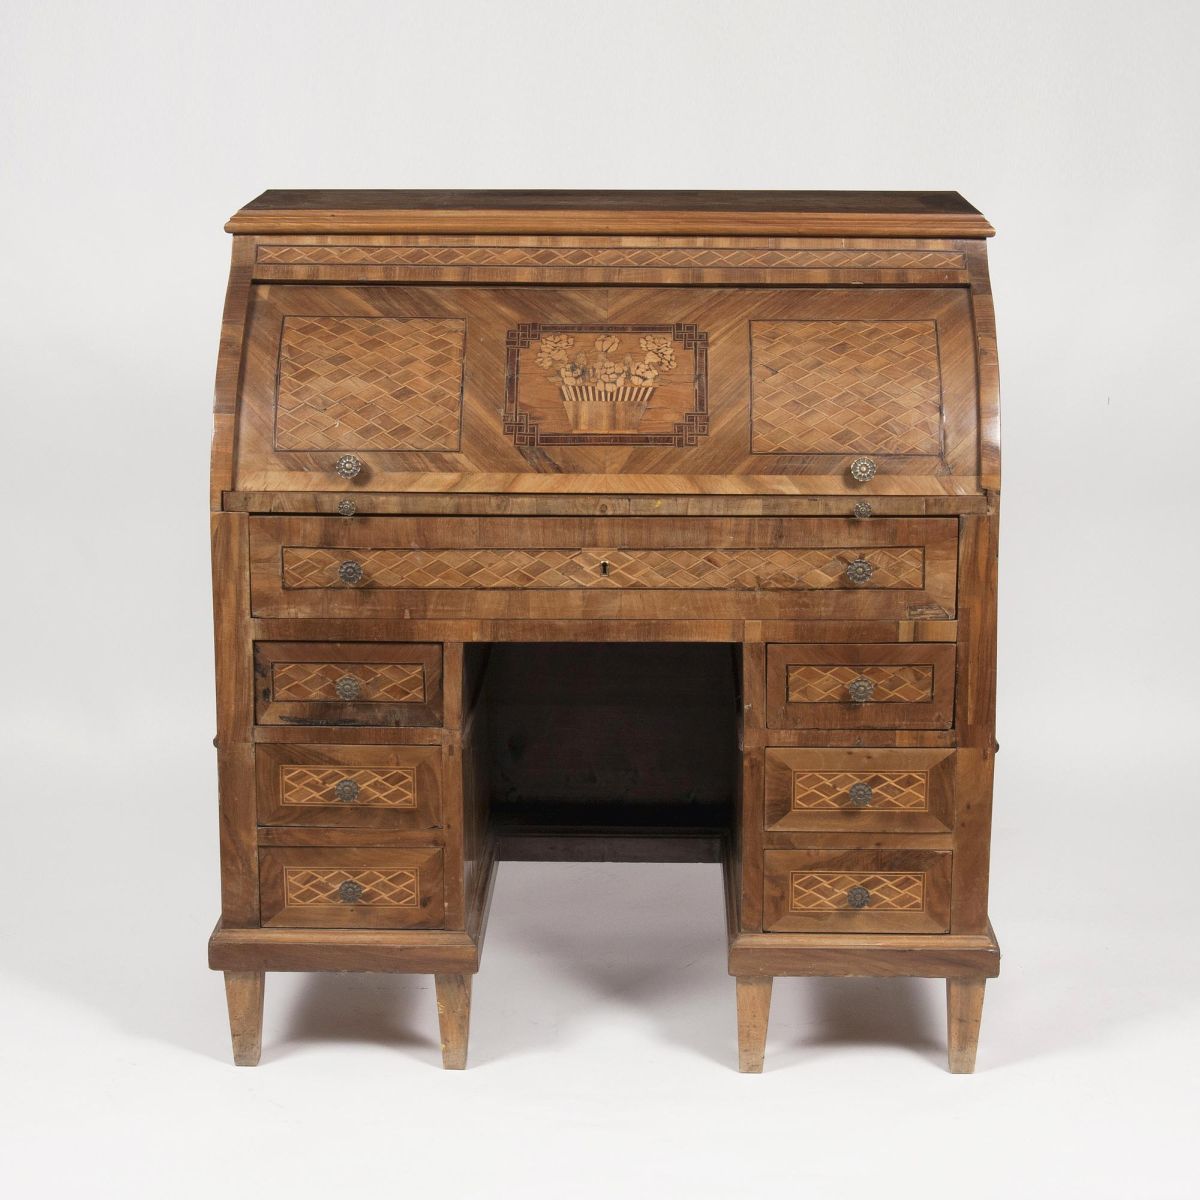 A Cylinder Bureau with Rhombic Marqueteries